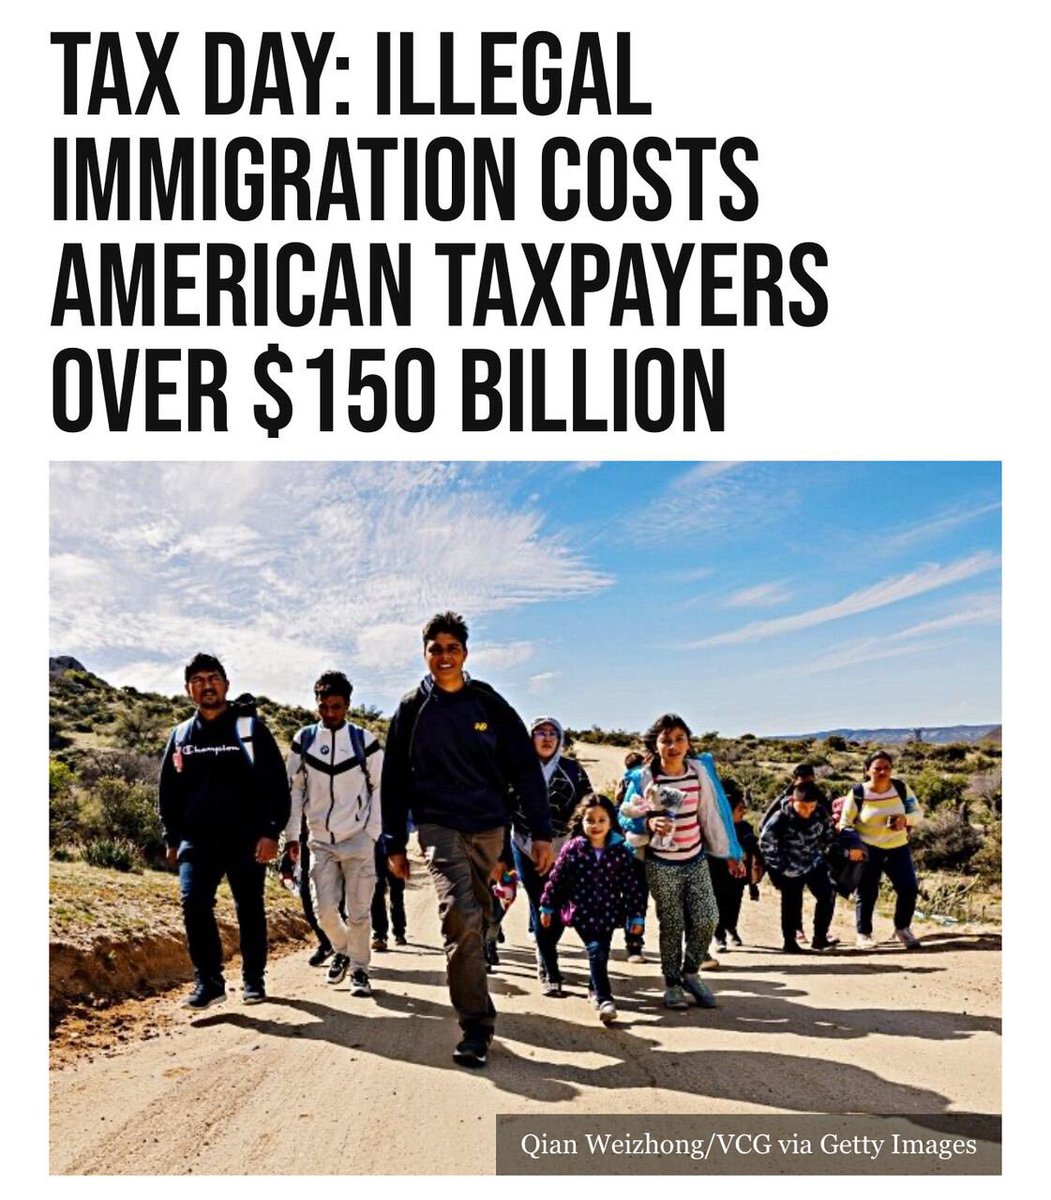 $150B to Illegals. Billions more to other country’s. I never voted for this, did you?